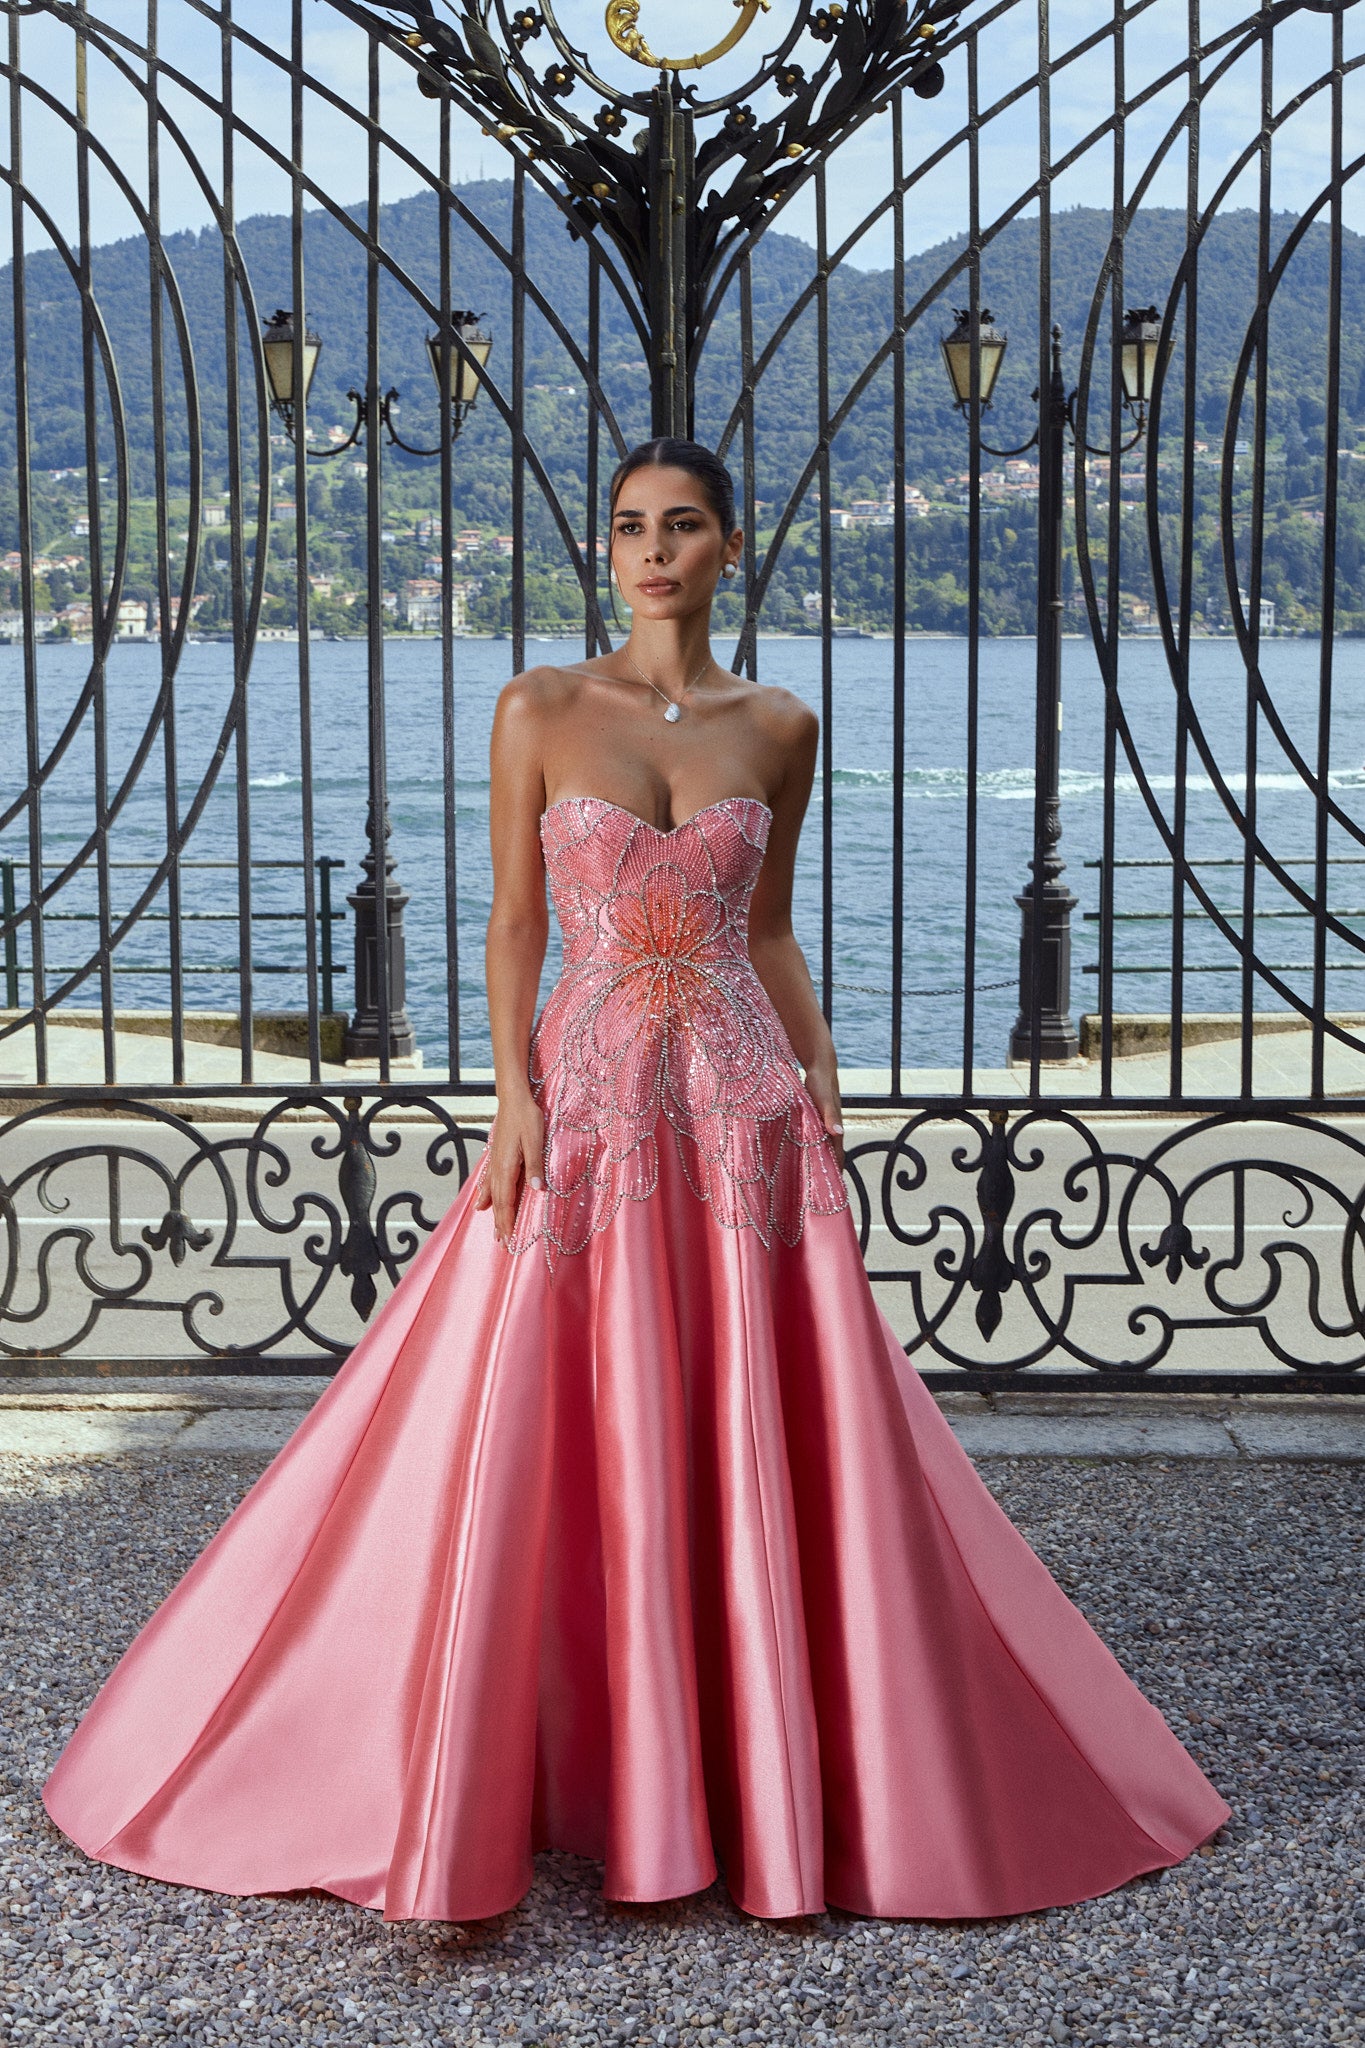 Fiore dress with a modern design and a bodice decorated with beads and crystals